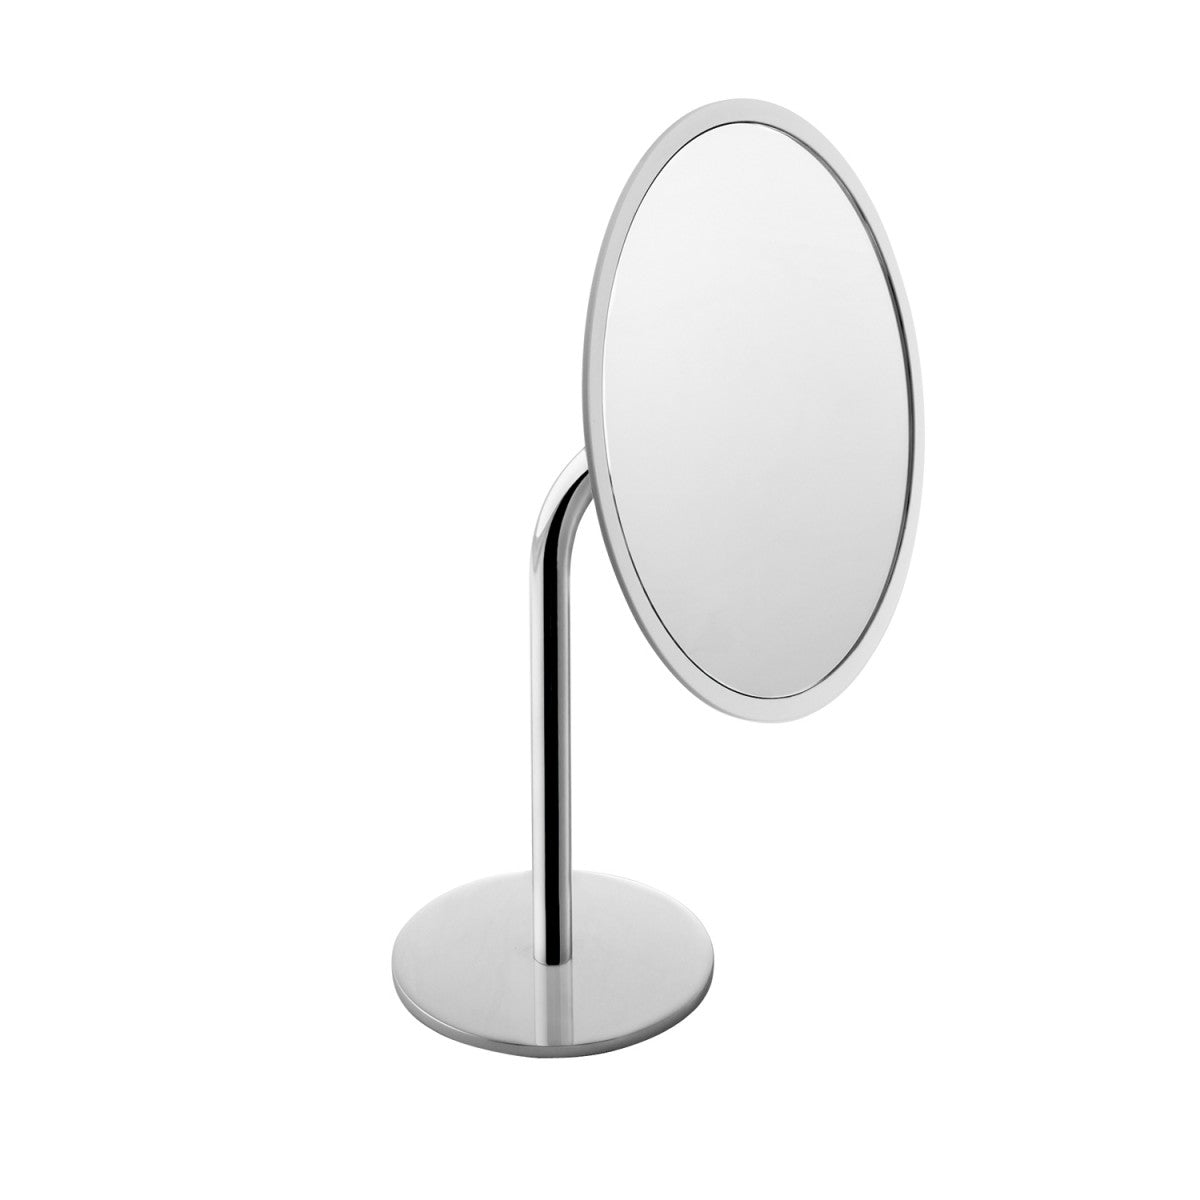 COSMIC Project Vanity Mirror 3X Magnification, Countertop Mount, Brass Body, Black Finish, 7-7/8 x 13 x 7-1/4 Inches (251AA83)